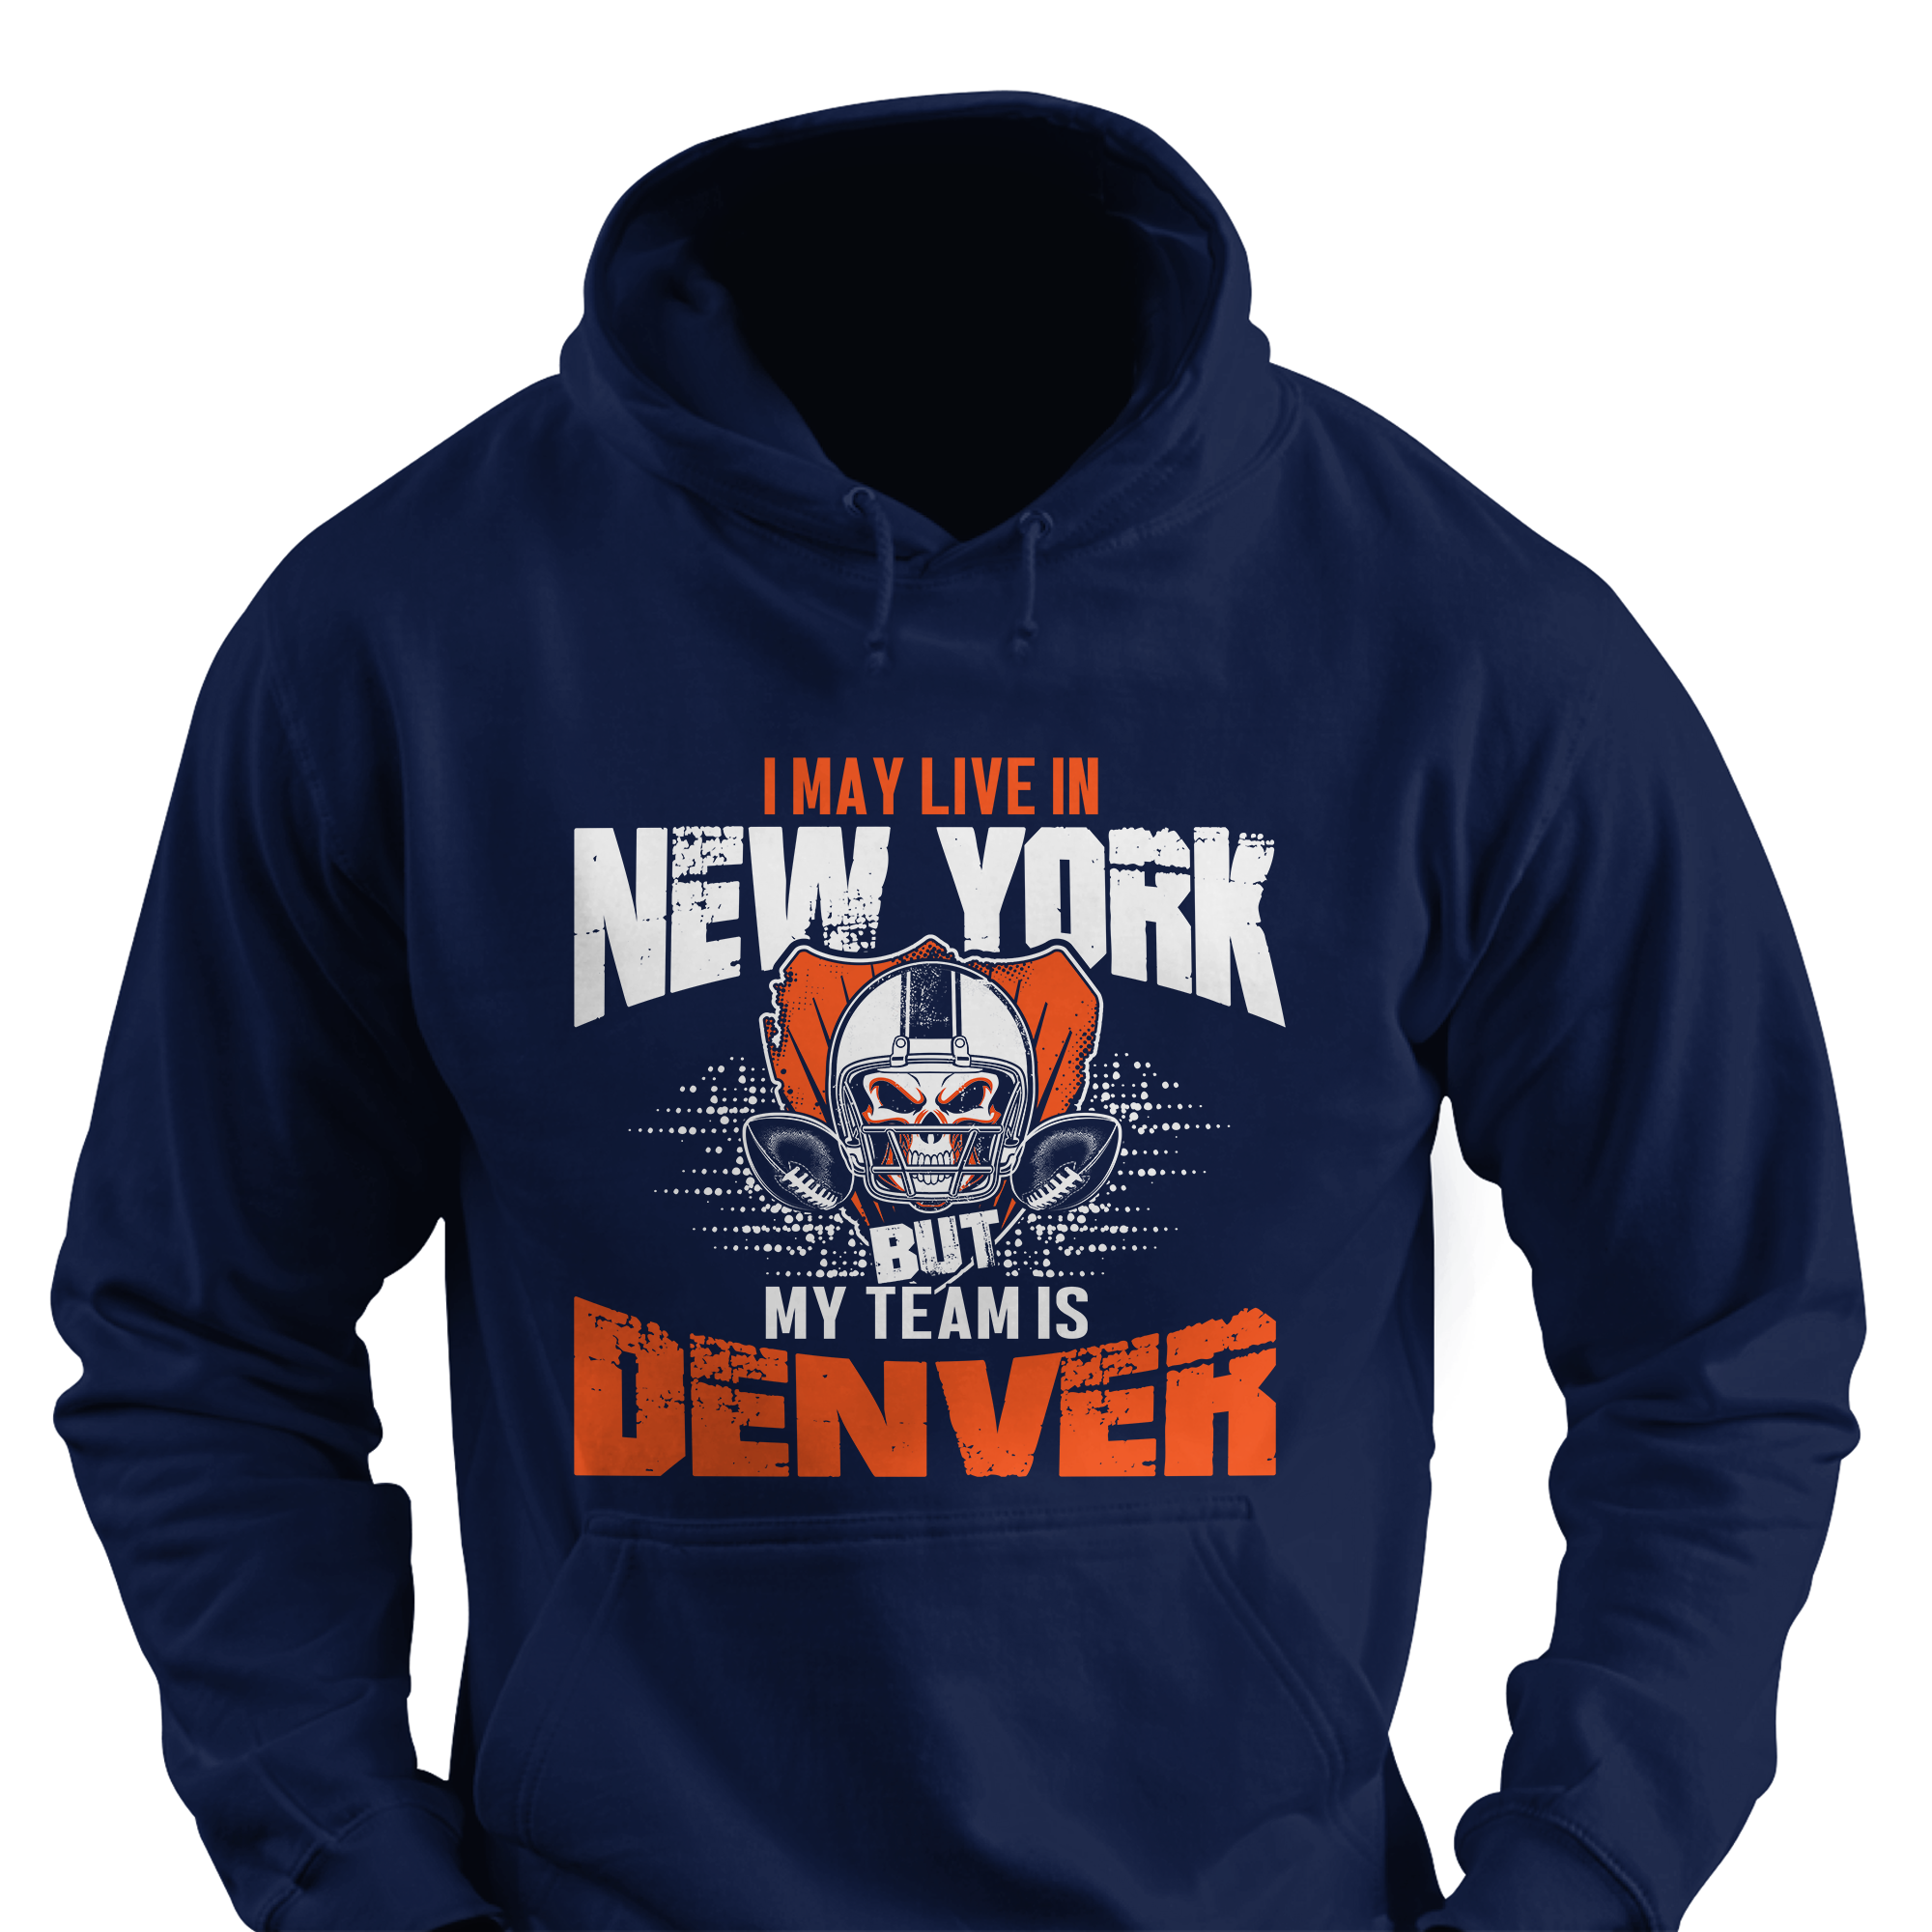 I May Live in New York but My Team is Denver